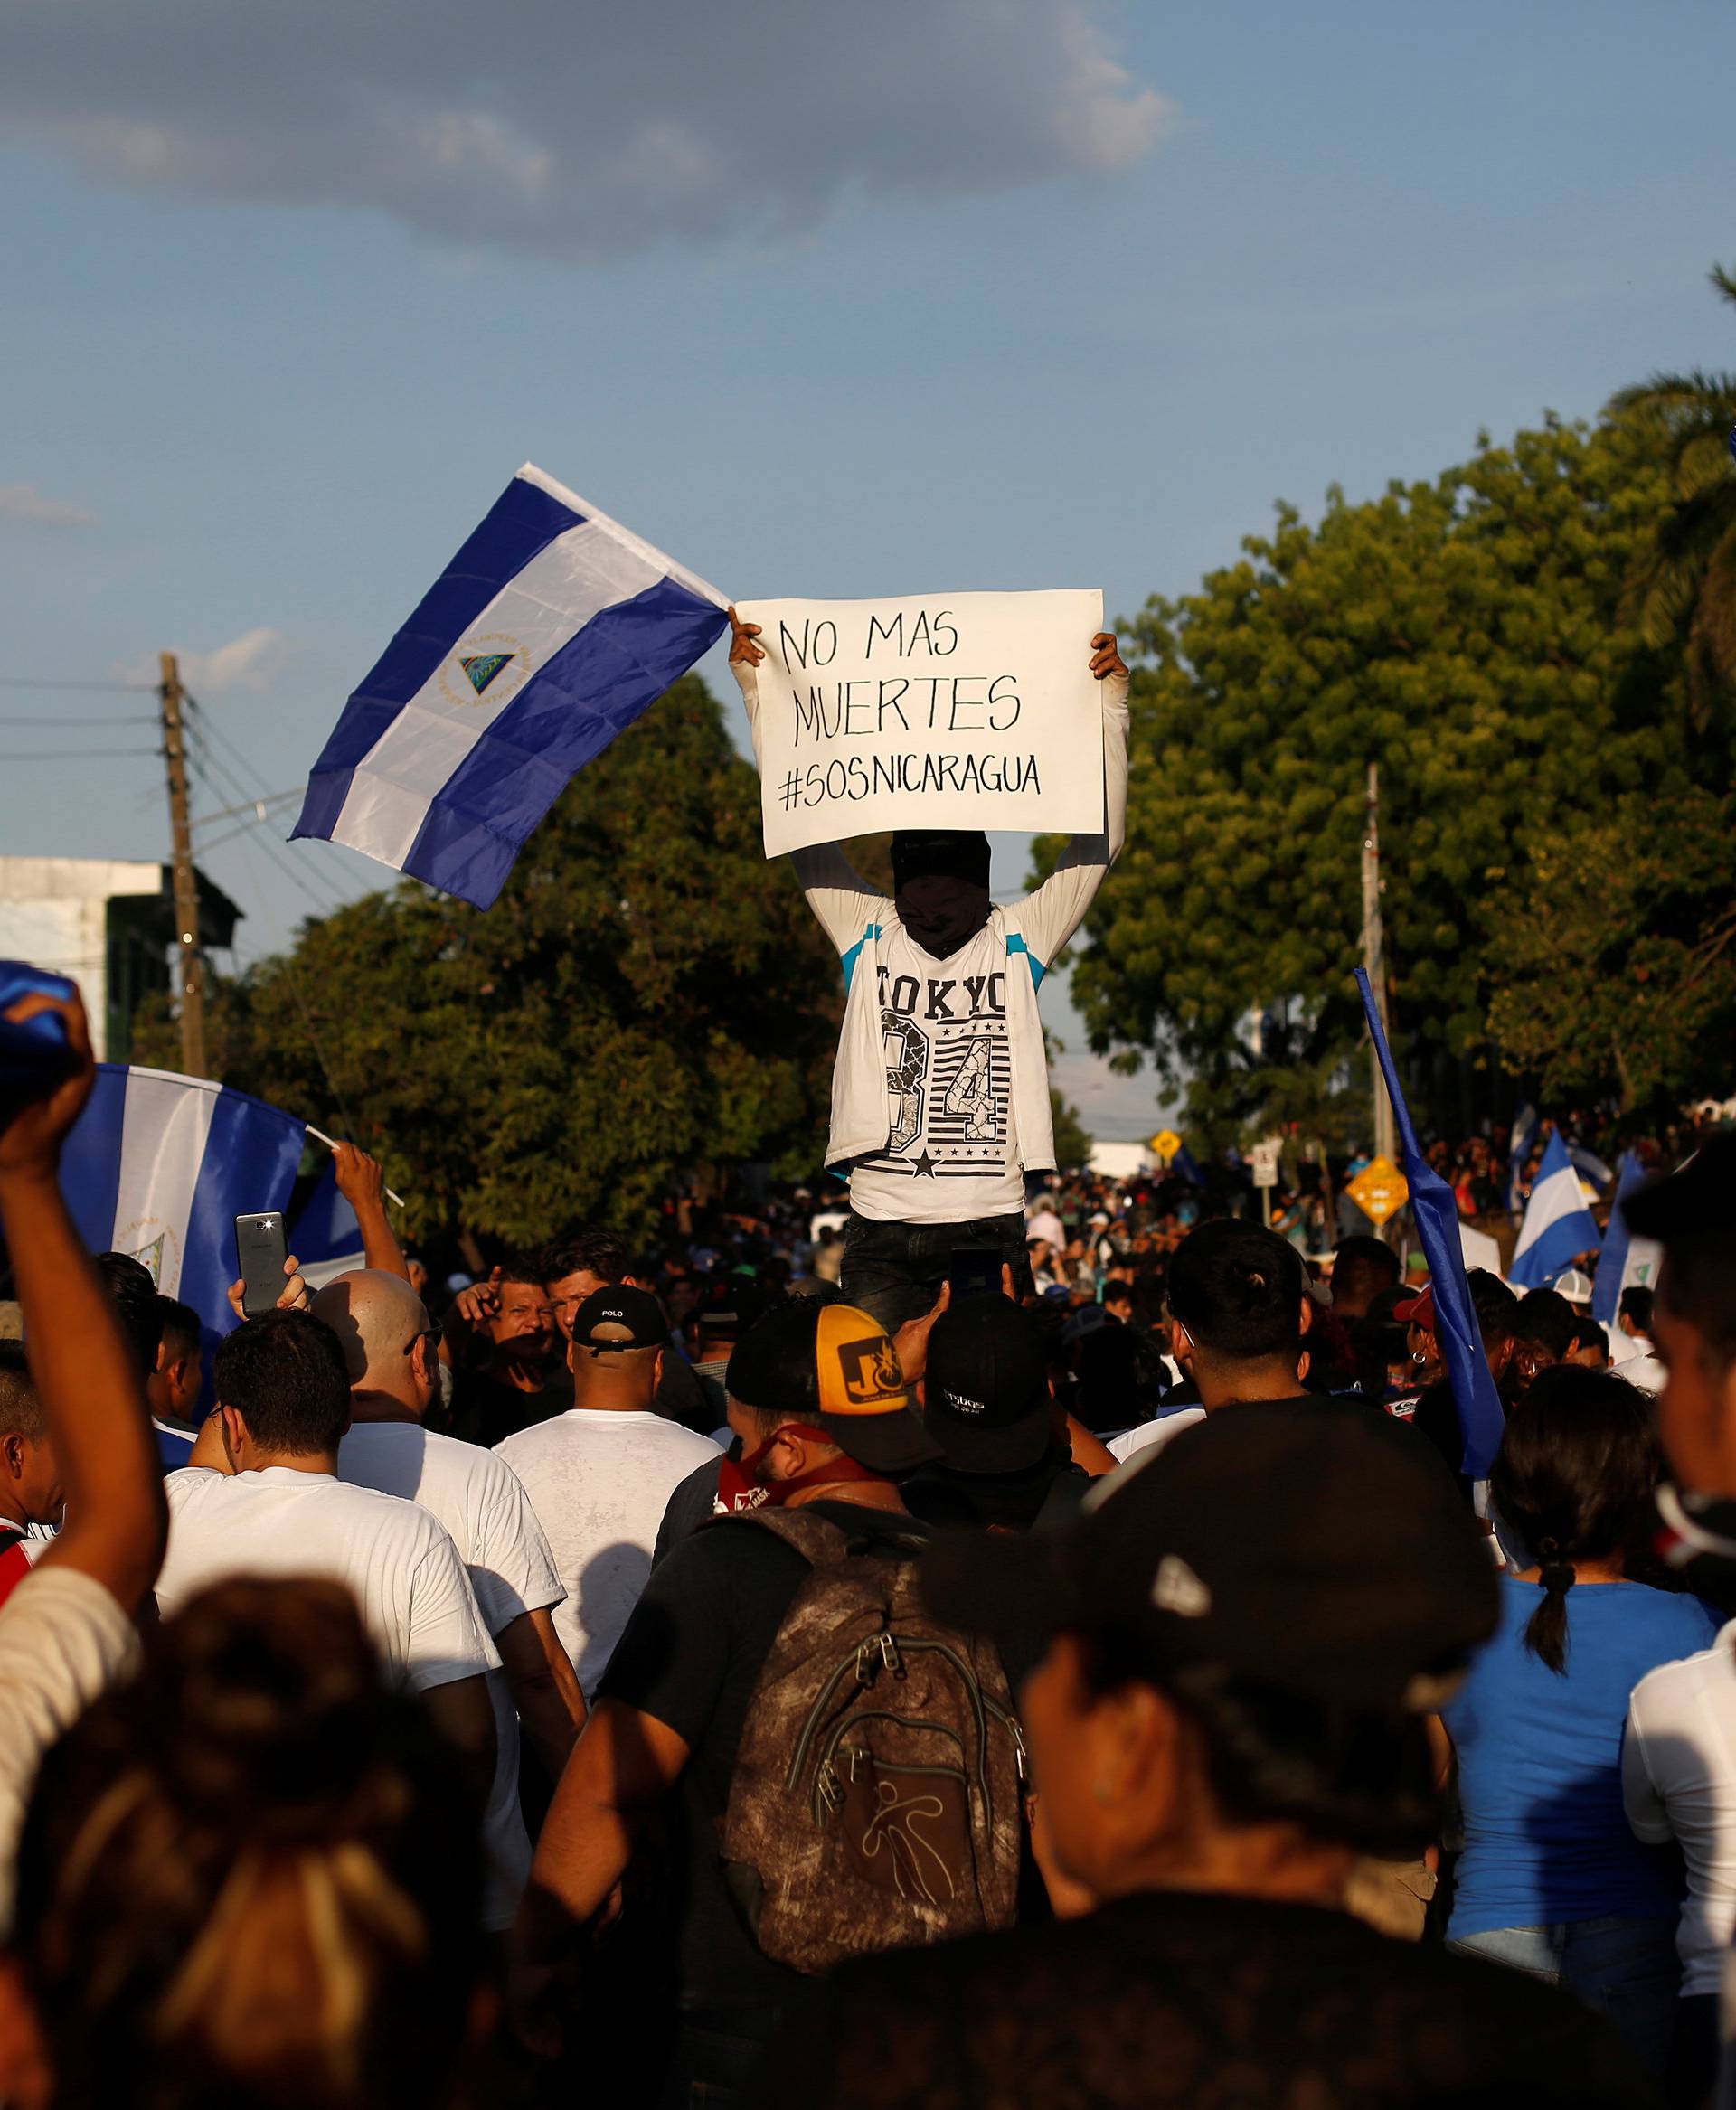 A demonstrator holds up a placard reading "No more deaths #SOSNicaragua" during a protest against police violence and the government of Nicaraguan President Daniel Ortega in Managua